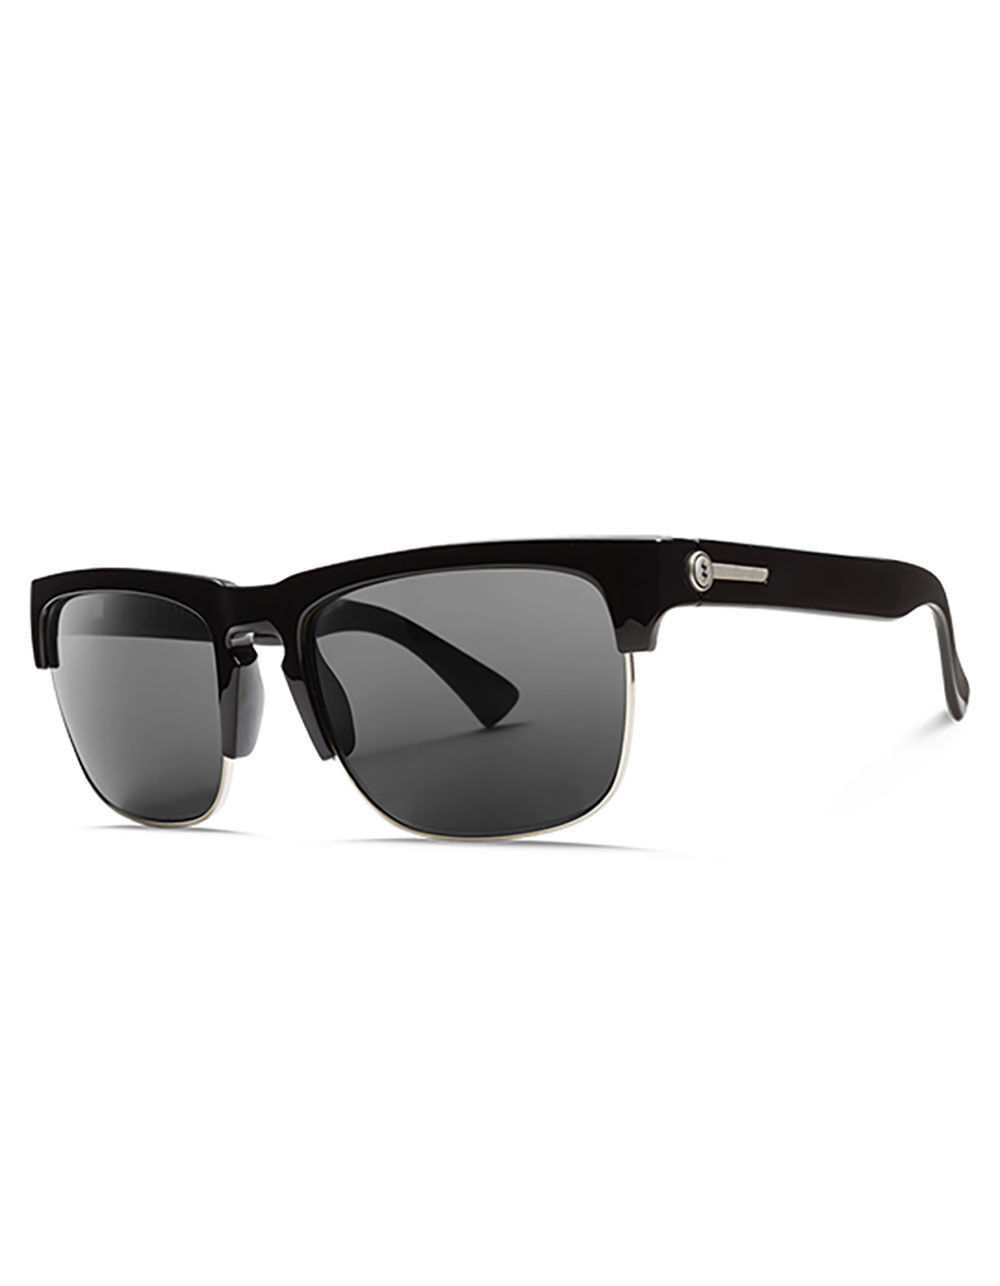 ELECTRIC KNOXVILLE UNION SUNGLASSES